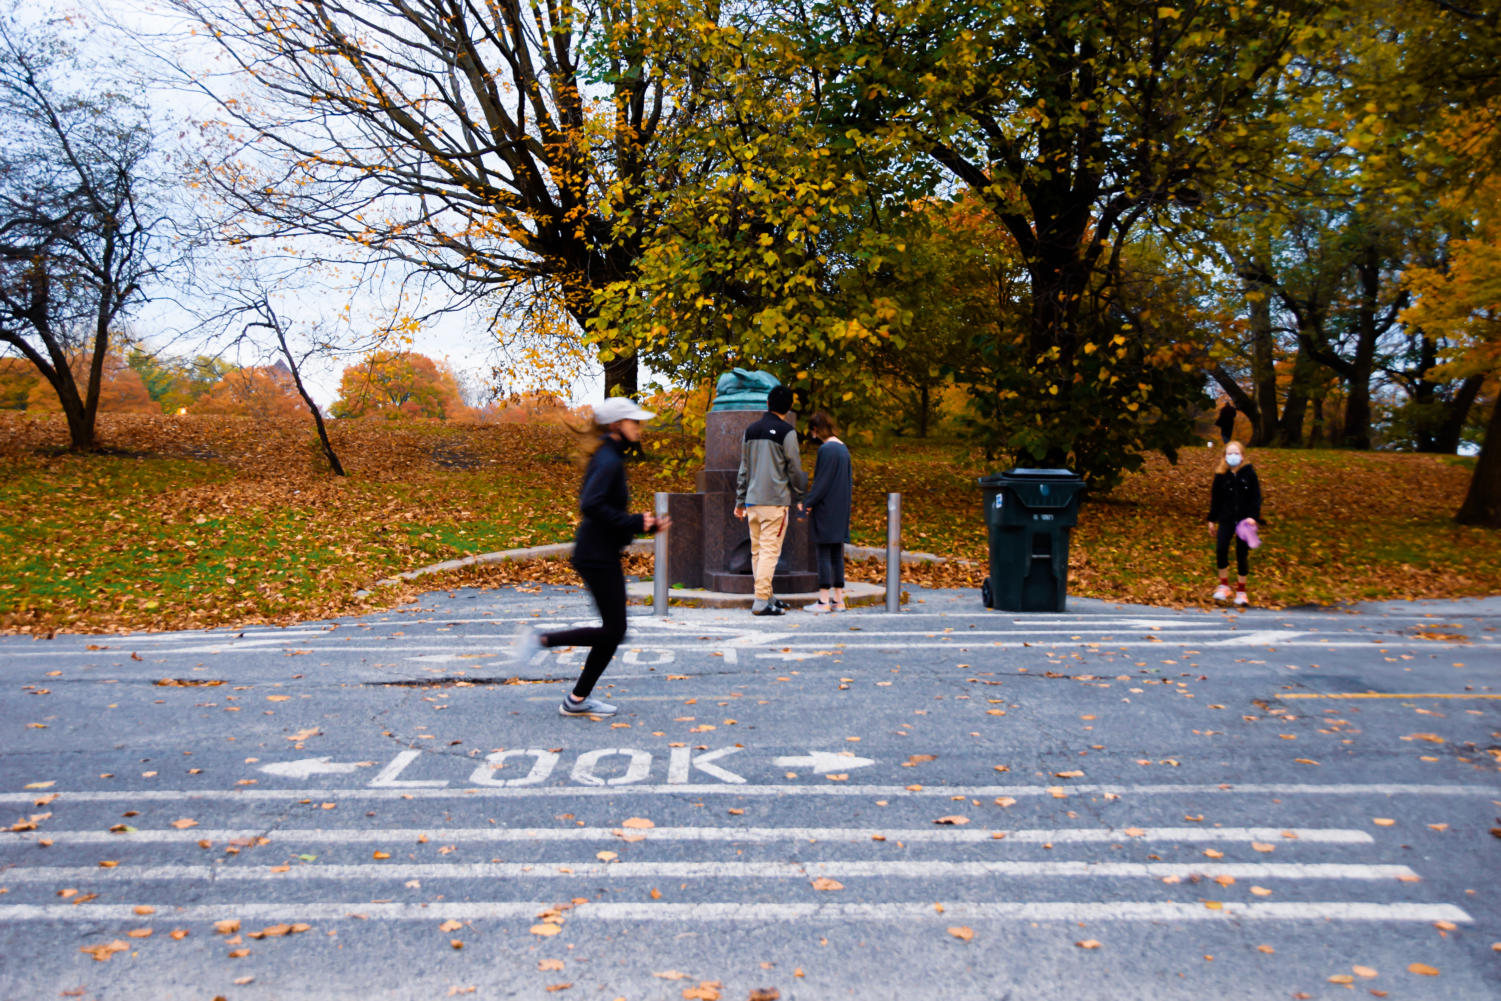 “Fall at the Point:” Promontory Point is bustling with Hyde Park residents among fallen leaves and colored trees.